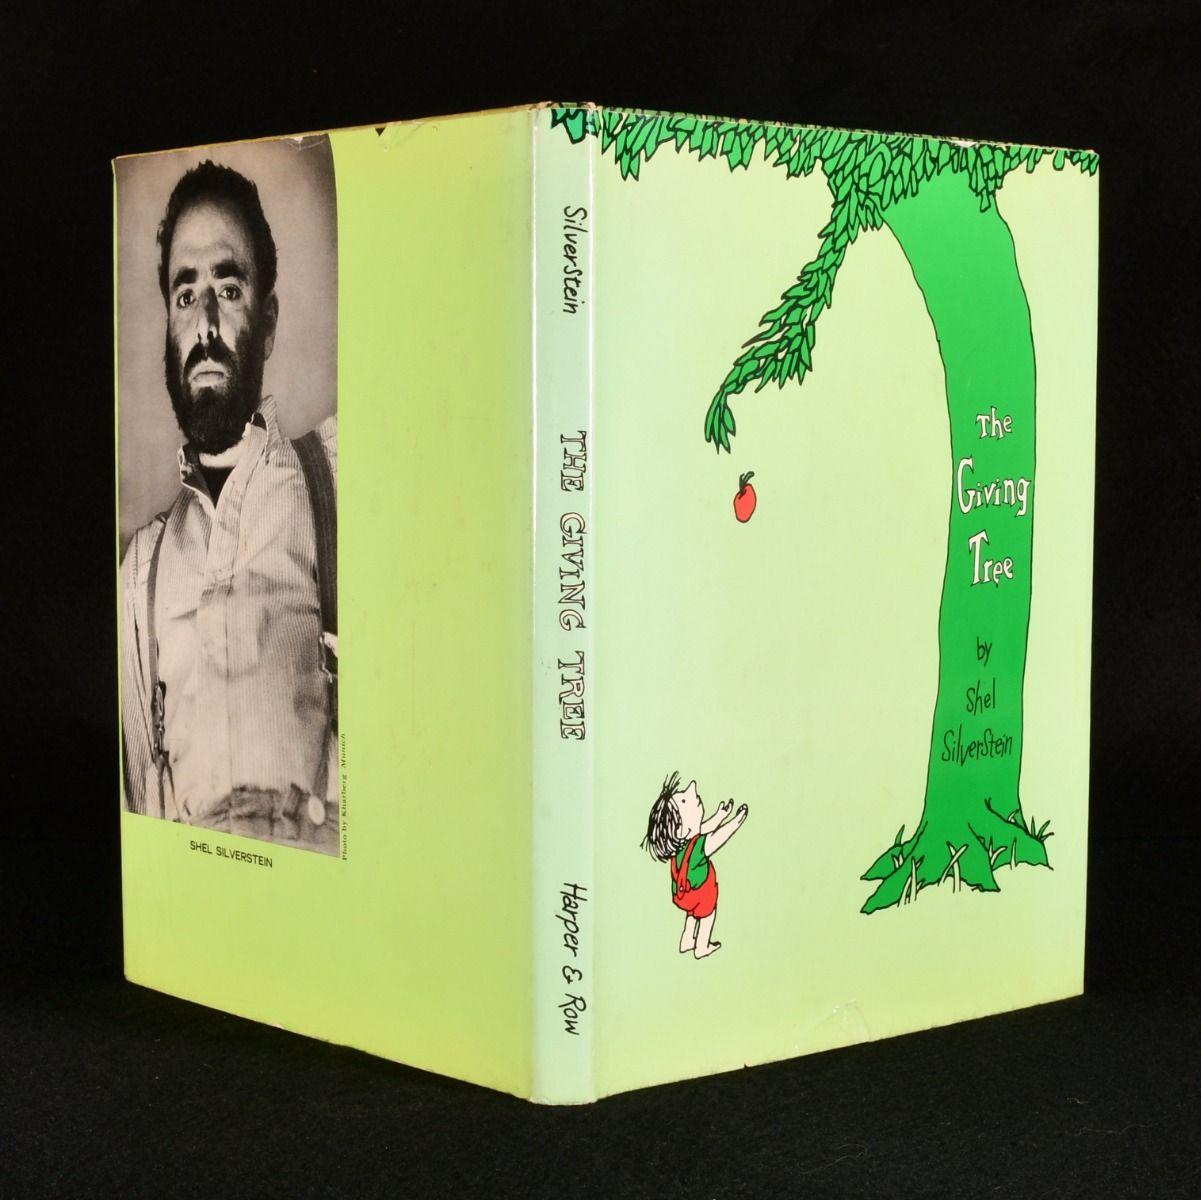 A lovely first impression copy of Shel Silverstein's important and influential children's novel, illustrated by Silverstein throughout, in an early impression dust wrapper.

The first edition, first impression of this work, with the four line